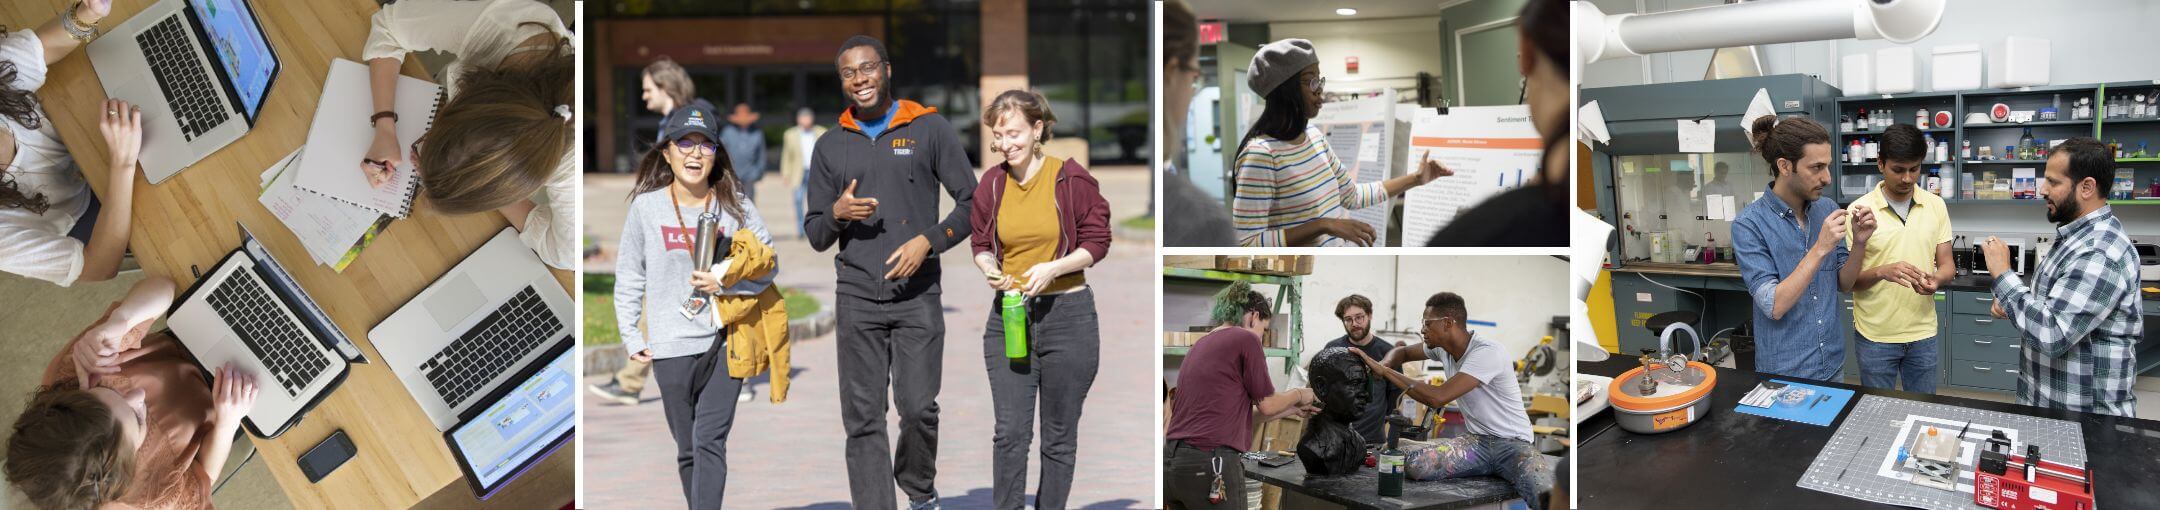 A collage of images of students on the RIT campus interacting with each other in class and out of class.